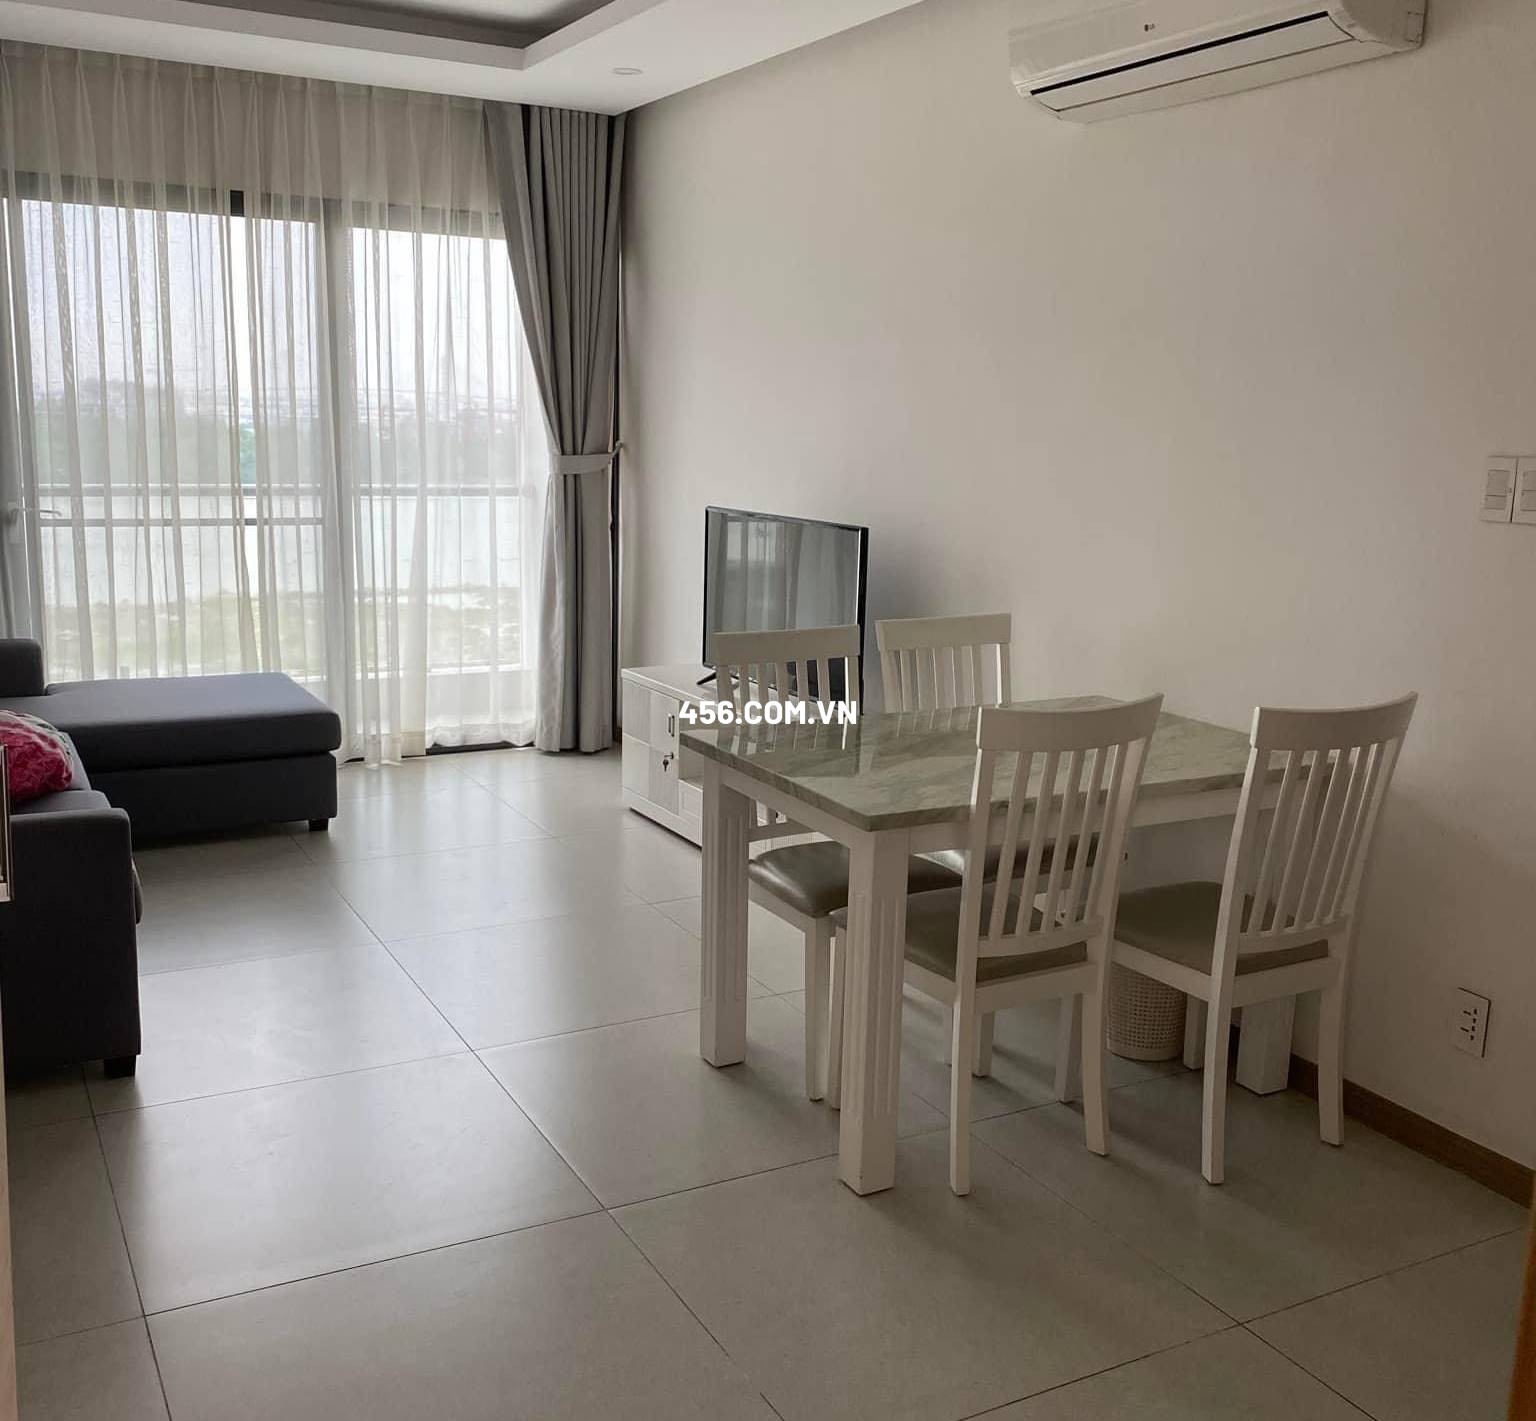 New City Thu Thiem Apartment 3 bedrooms for...